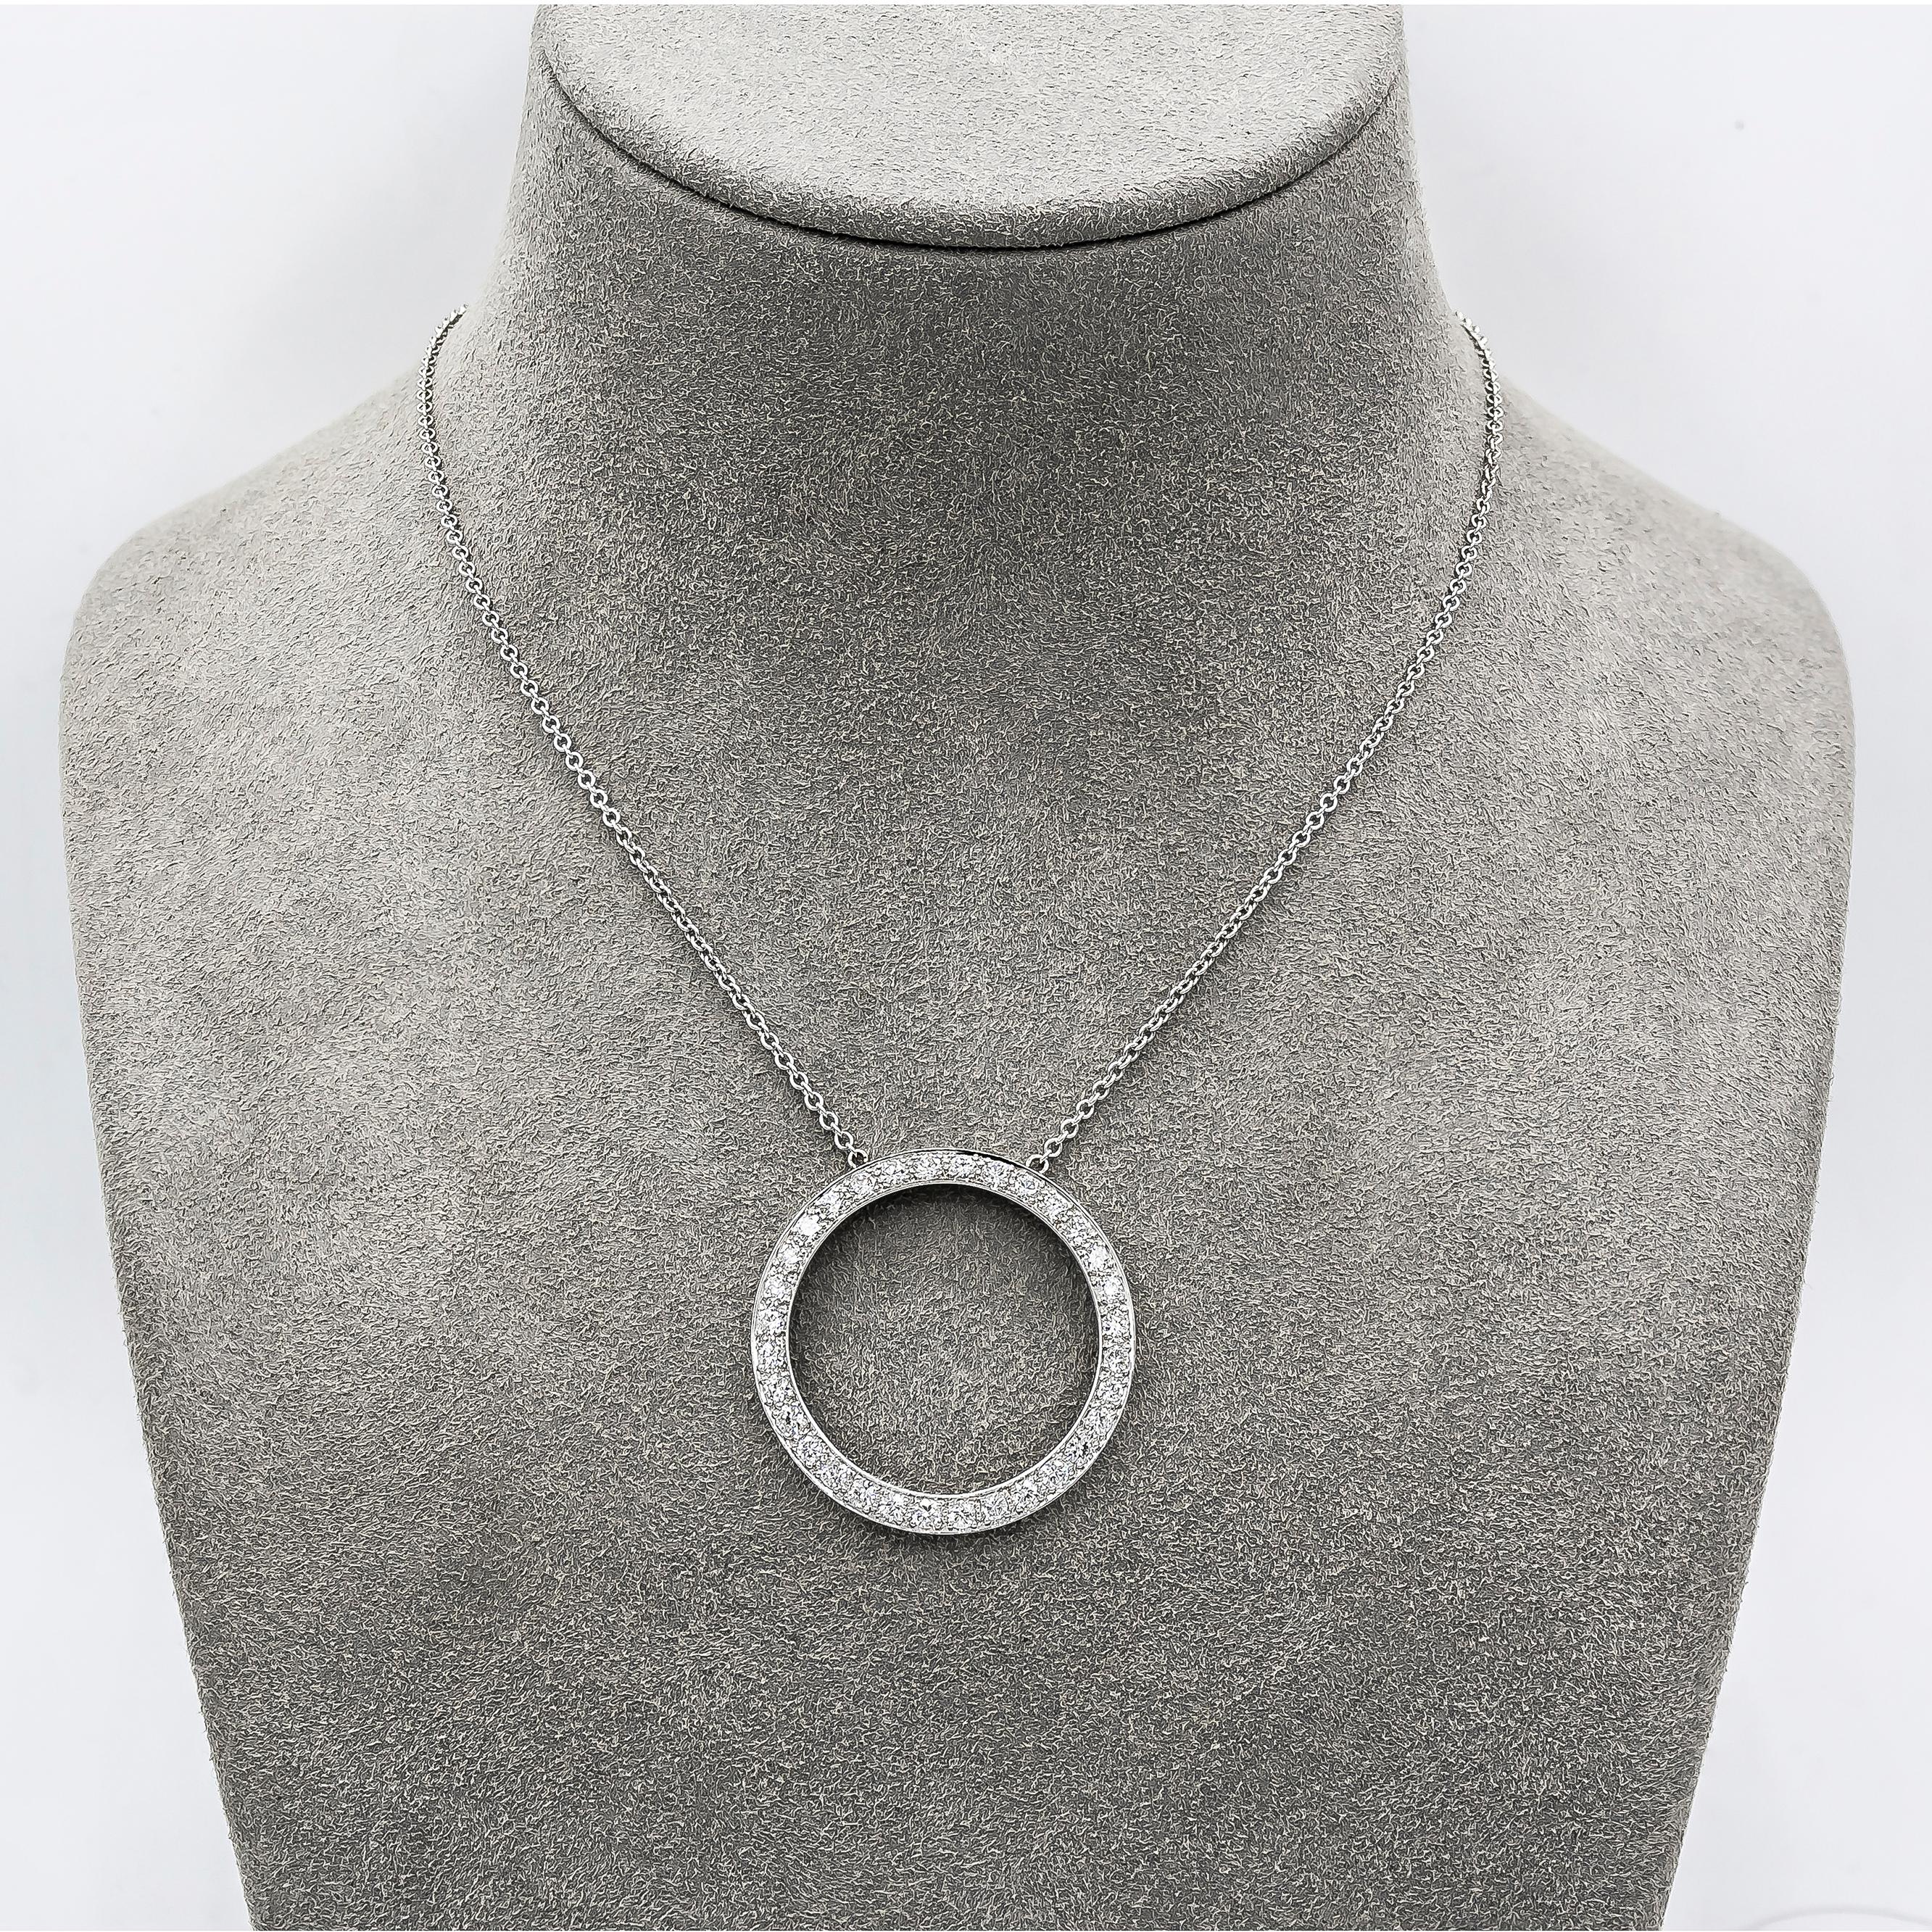 Features an open work circle pendant accented with round brilliant diamonds. Diamonds weigh 1.60 carats total. Made in platinum. 18 inch adjustable chain, 14k white gold.

Style available in different price ranges. Prices are based on your